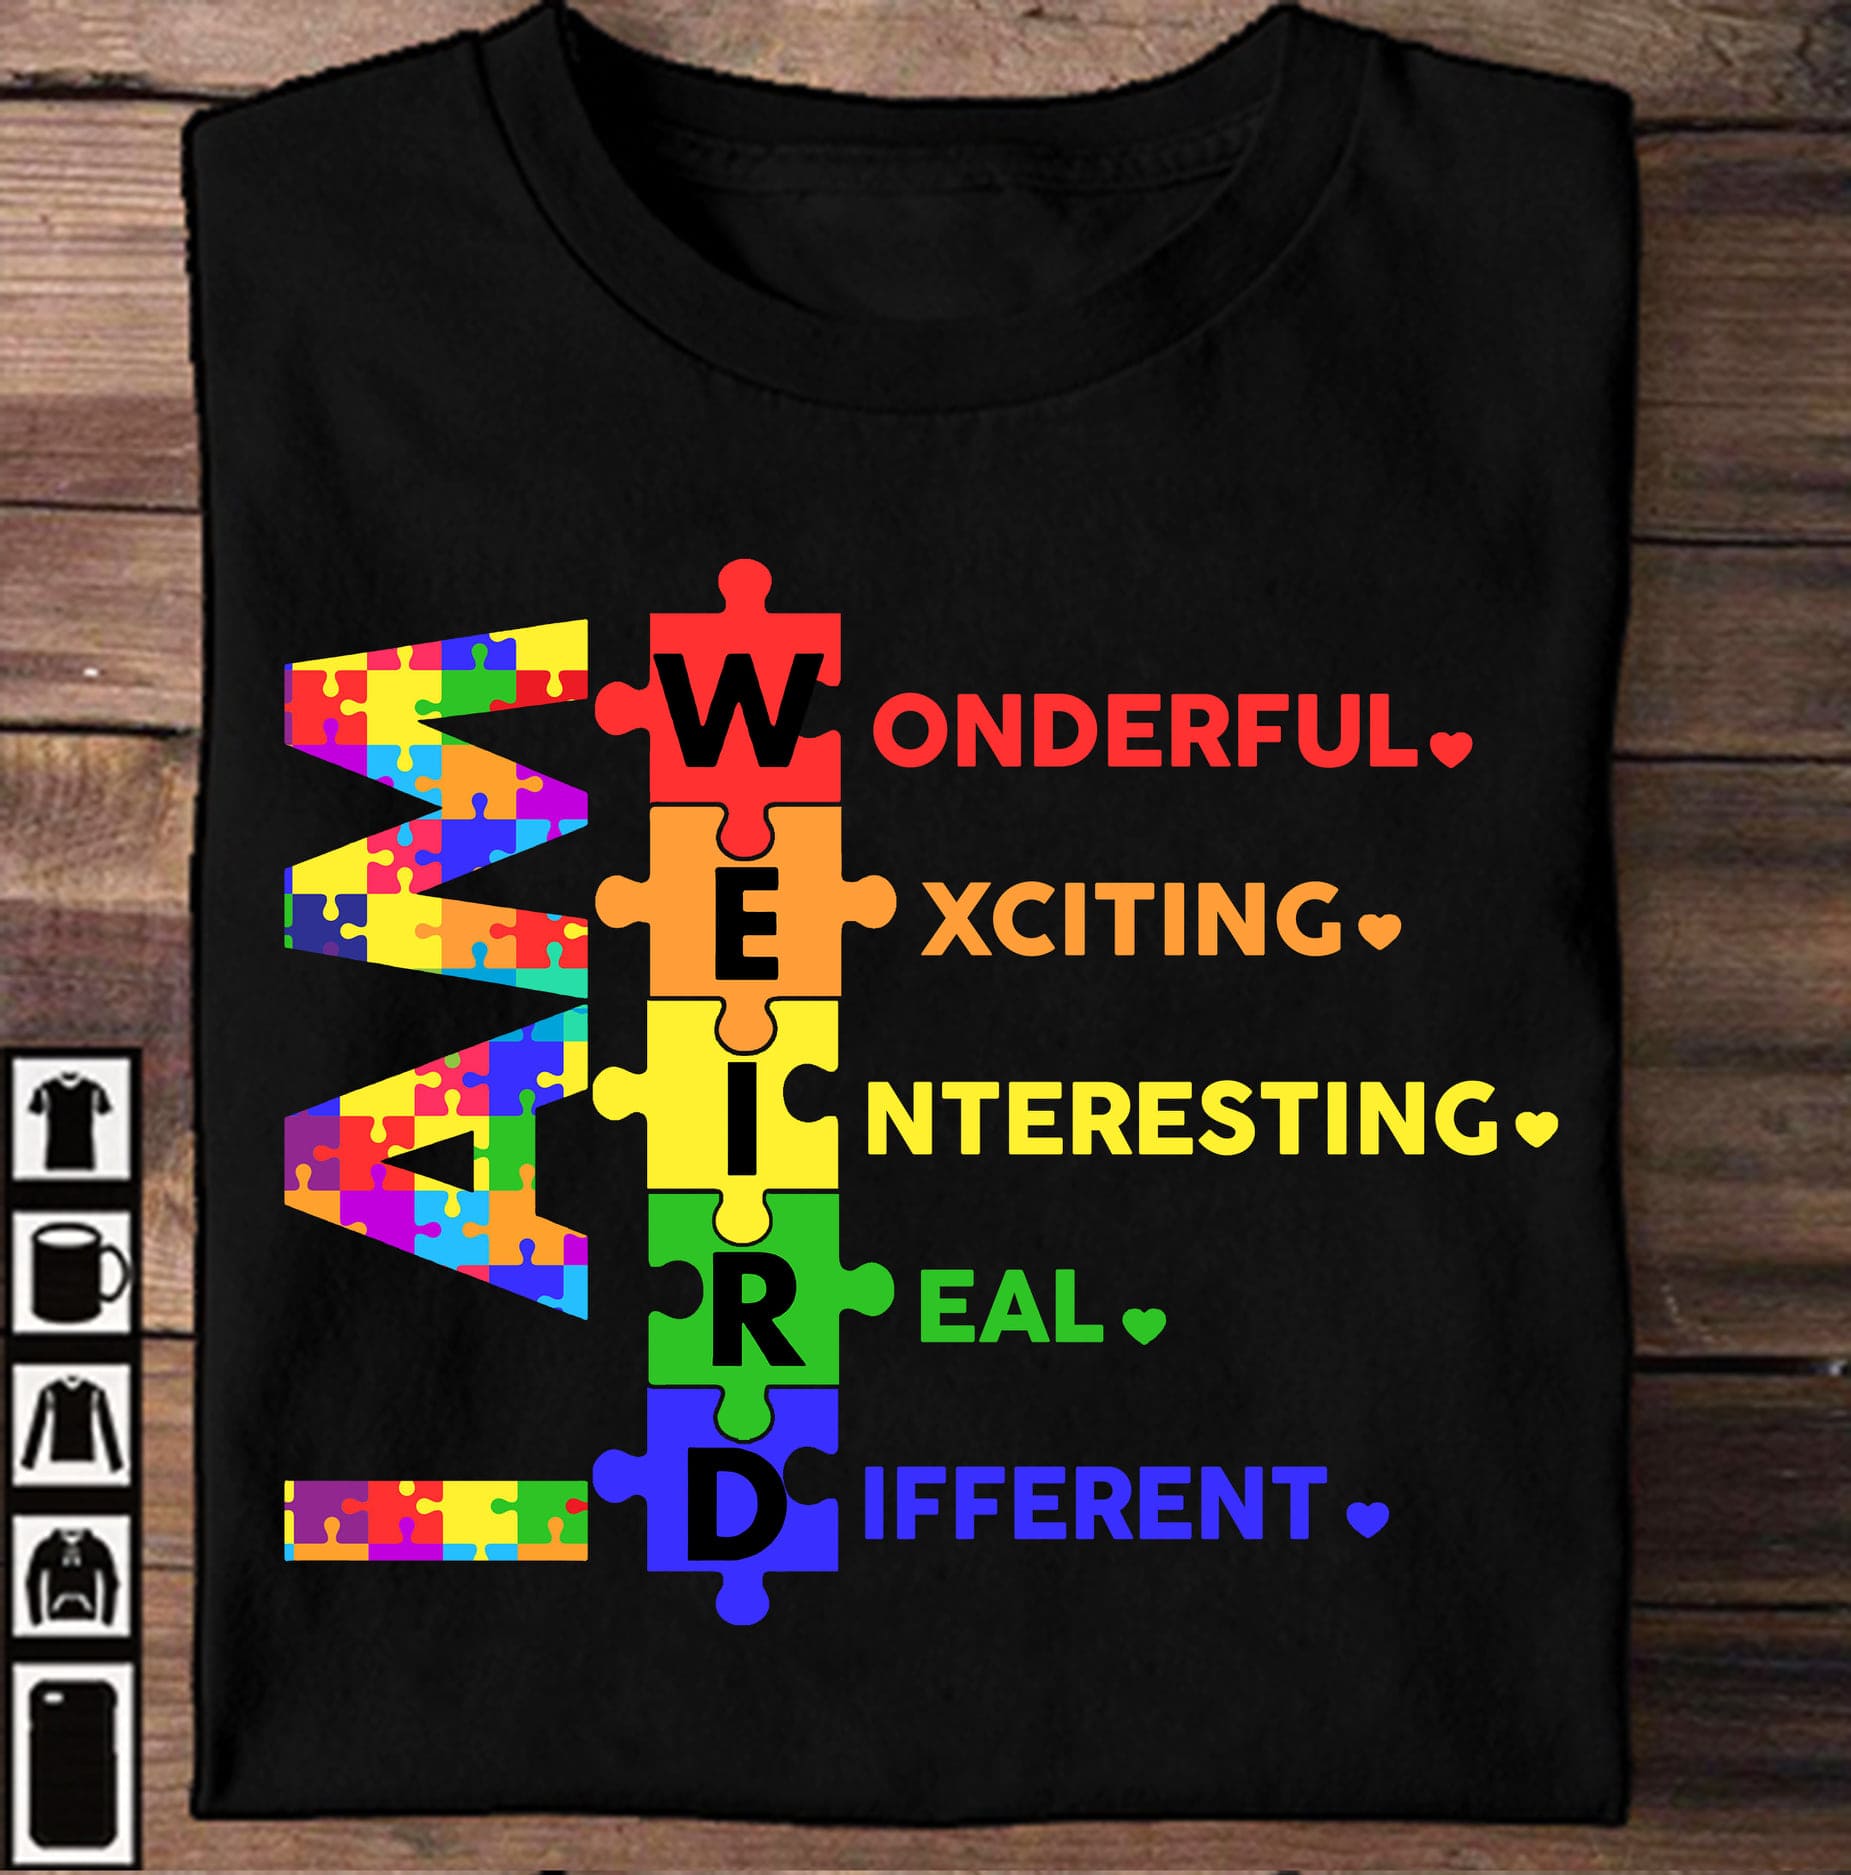 Autism Symbol - I am weird wonderful exciting interesting real different